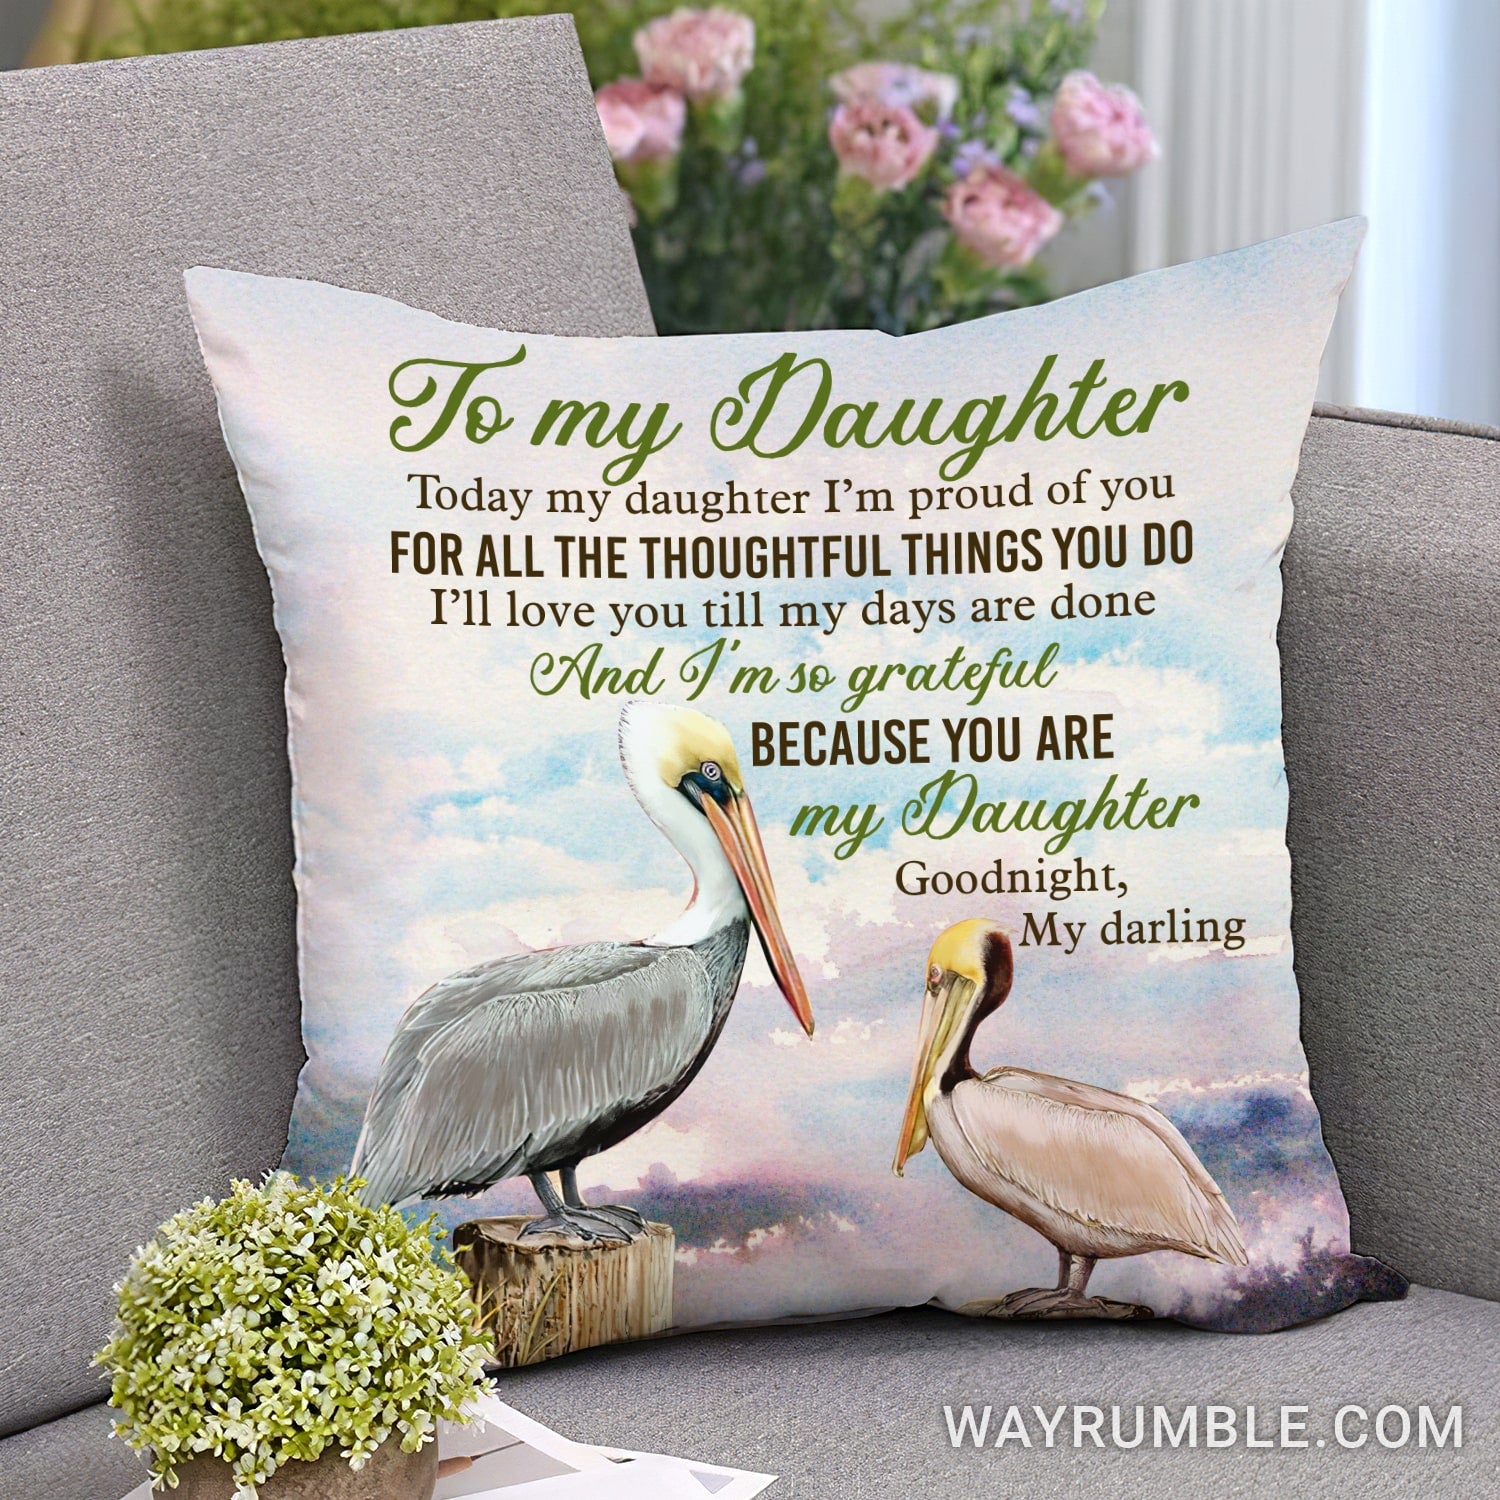 To my daughter - Seagull - I'm so grateful because you are my daughter - Family Pillow